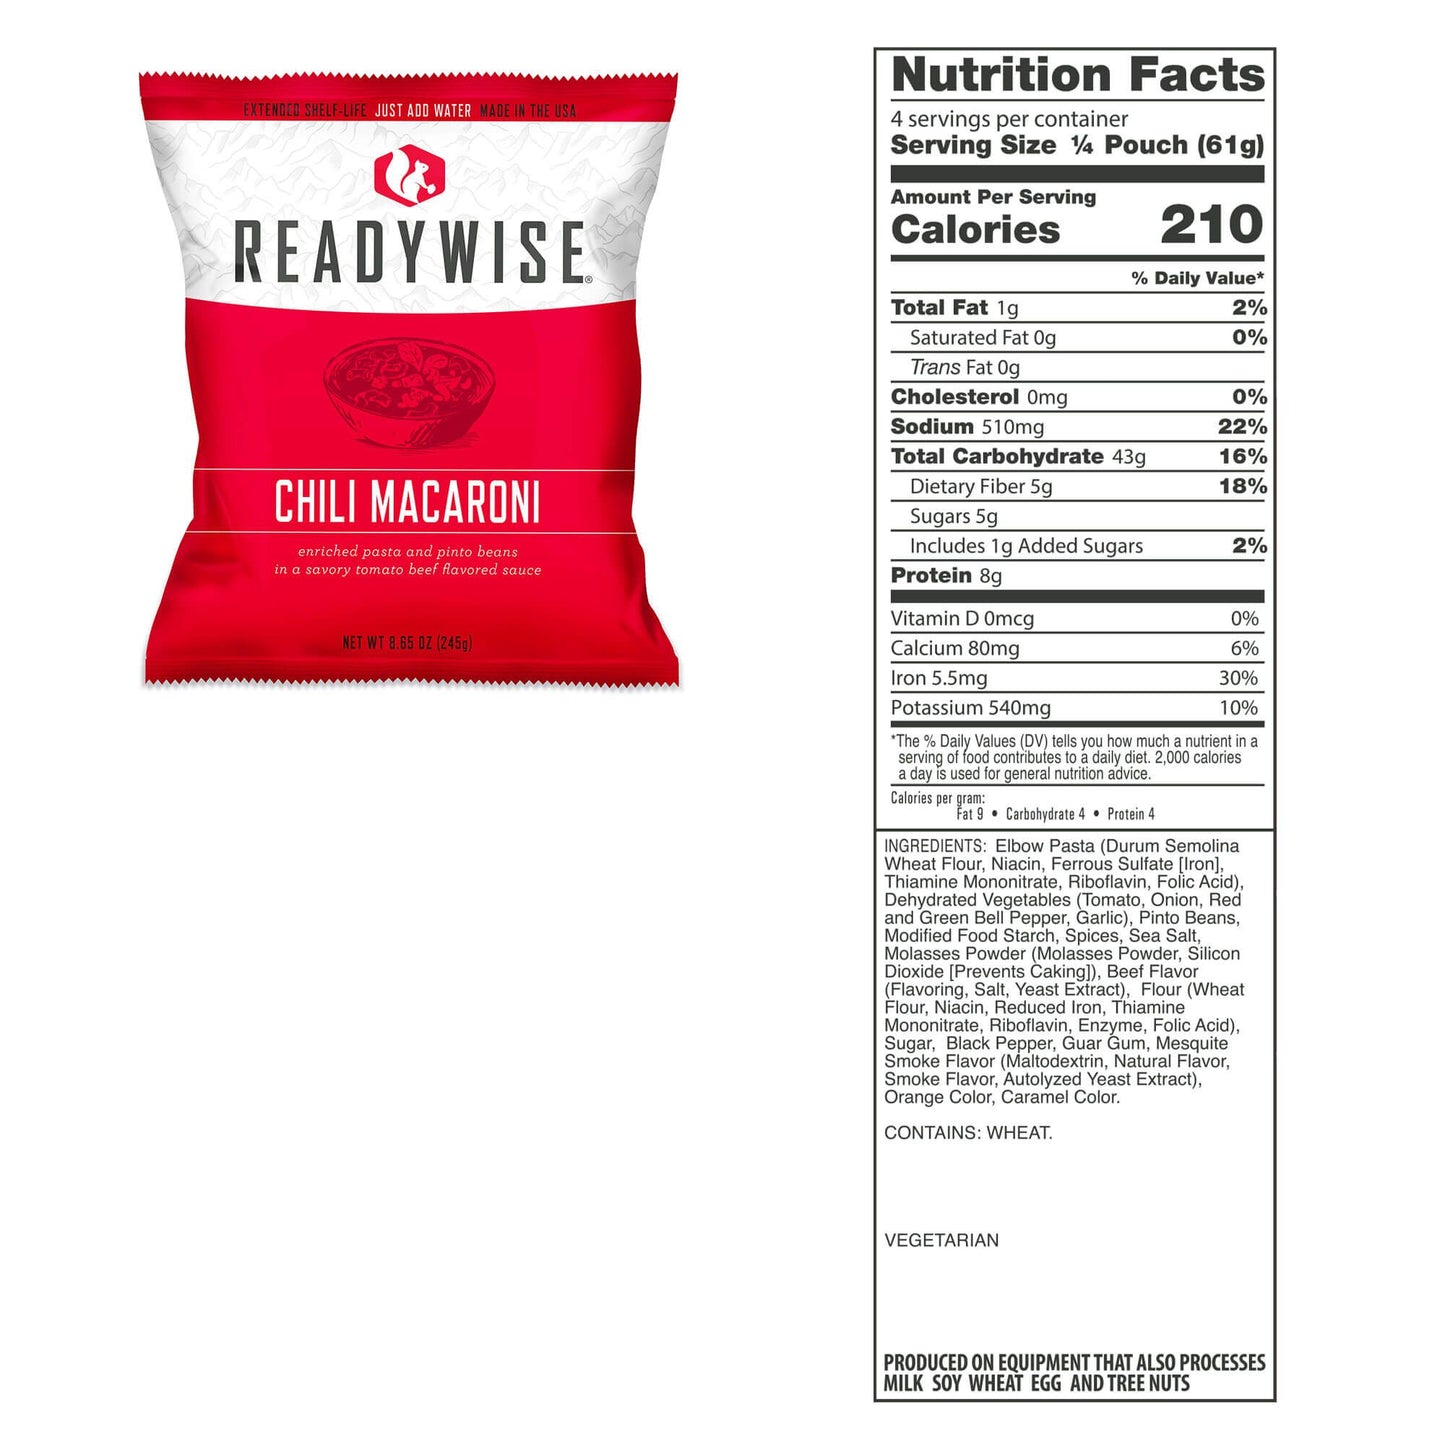 Chili Macaroni packet with nutritional information